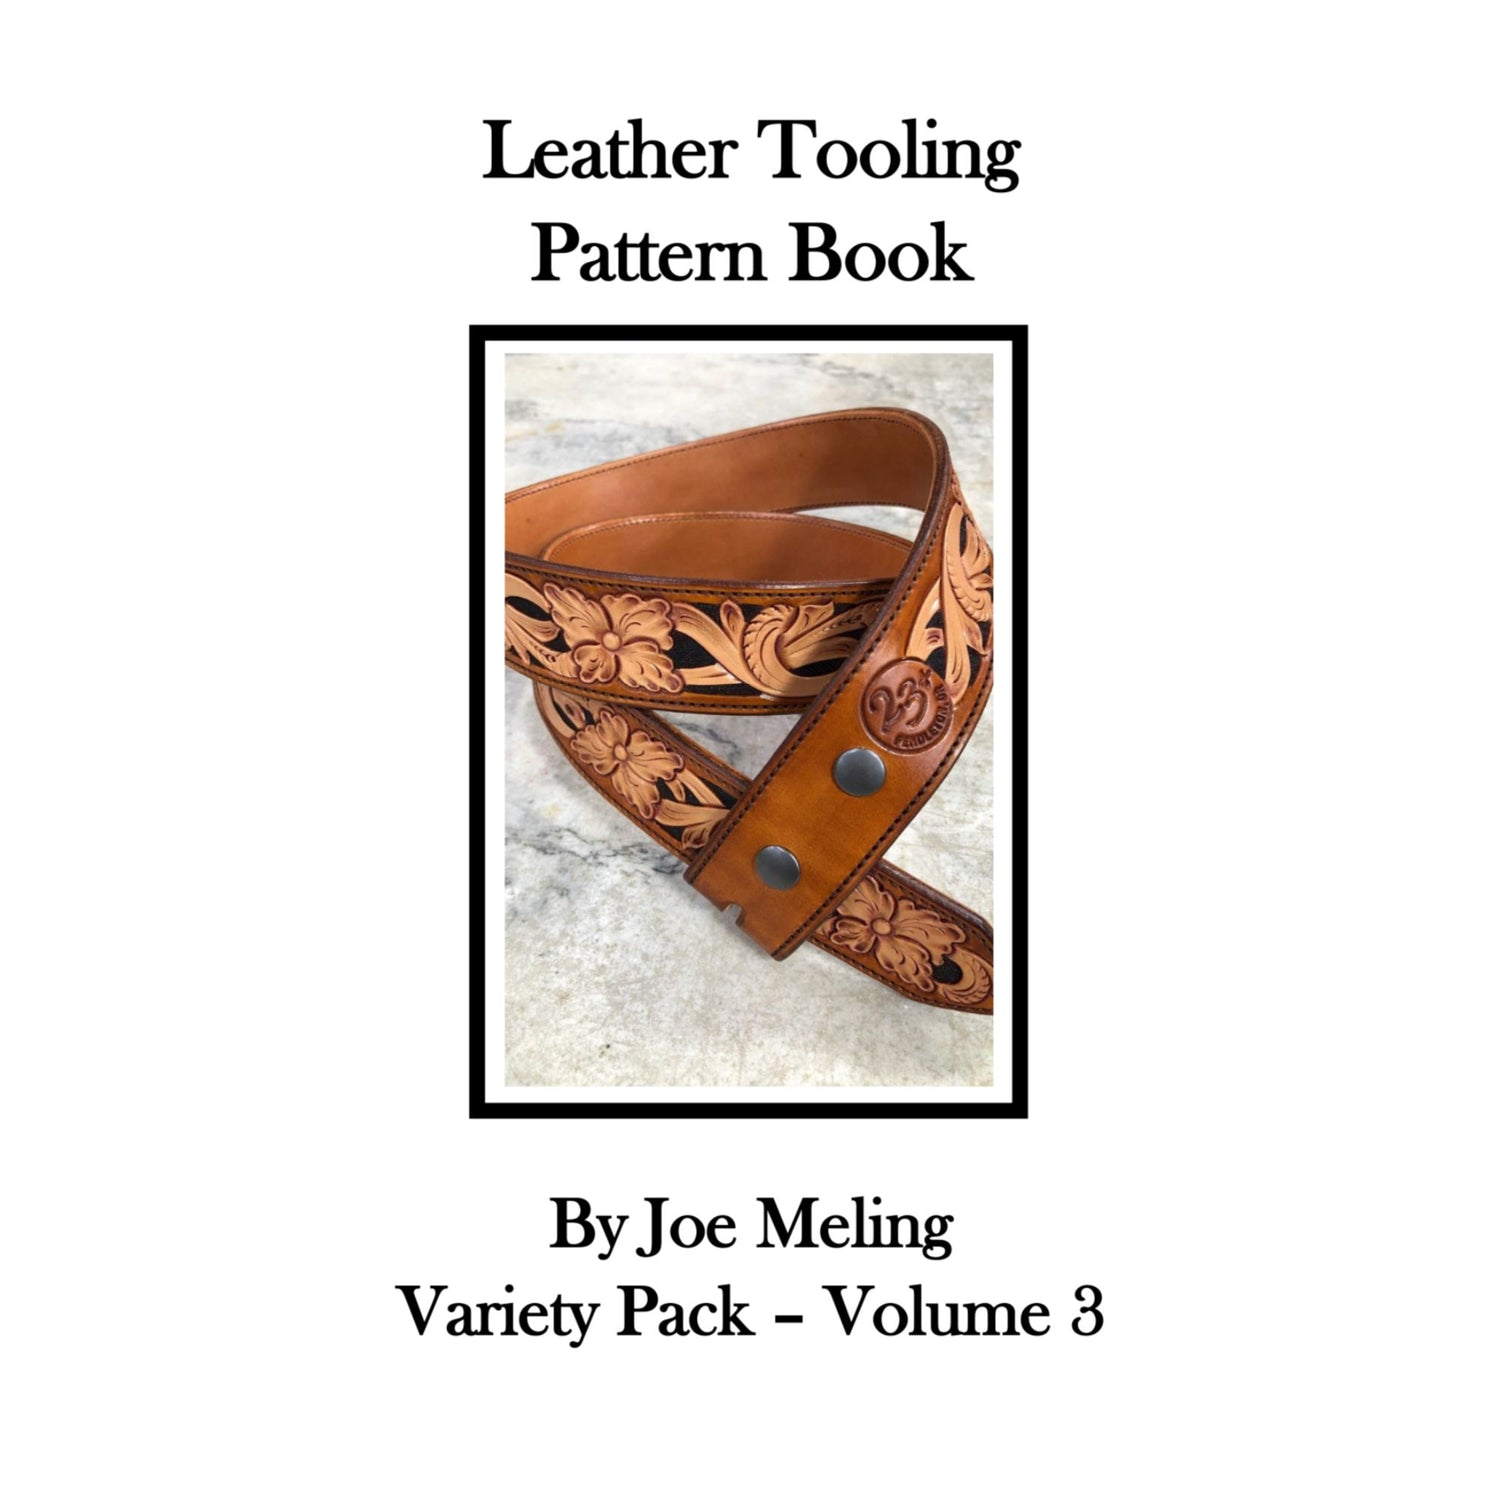 (Digital) Leather Tooling Pattern Book Vol 3